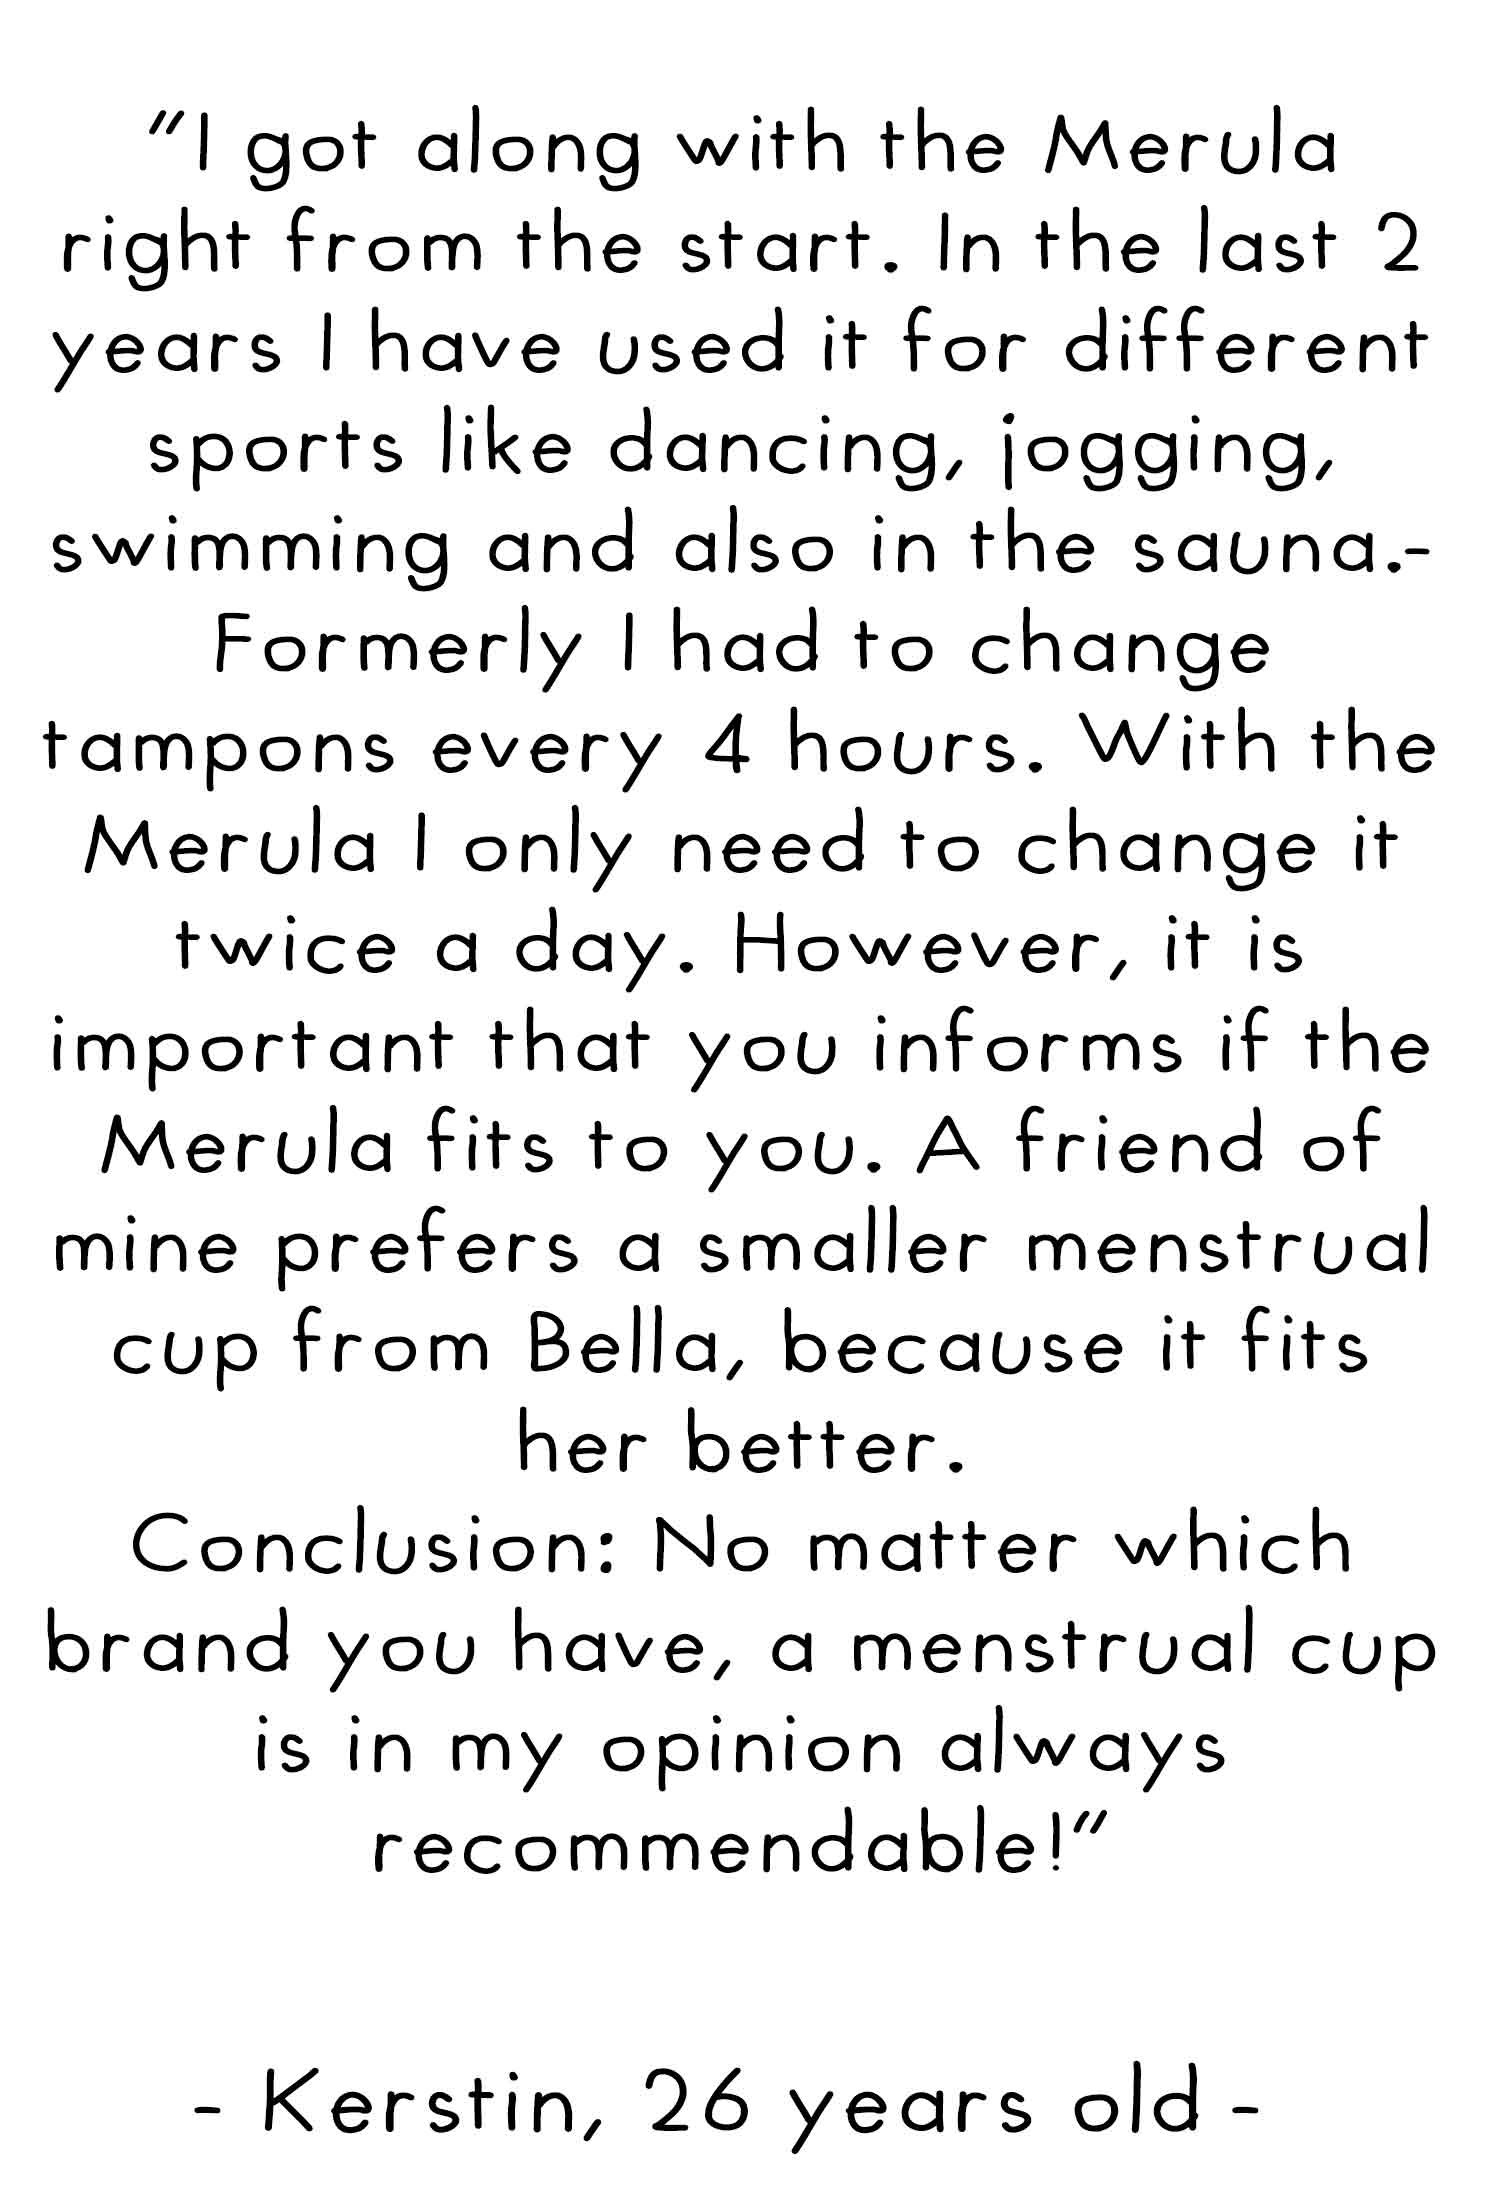 I got along with the merula right from the start. In the last 2 years I have used it for different sports like dancing, jogging, swimming and also in the sauna. Formerly I had to change tampons every 4 hours. With the merula I only need to change it twice